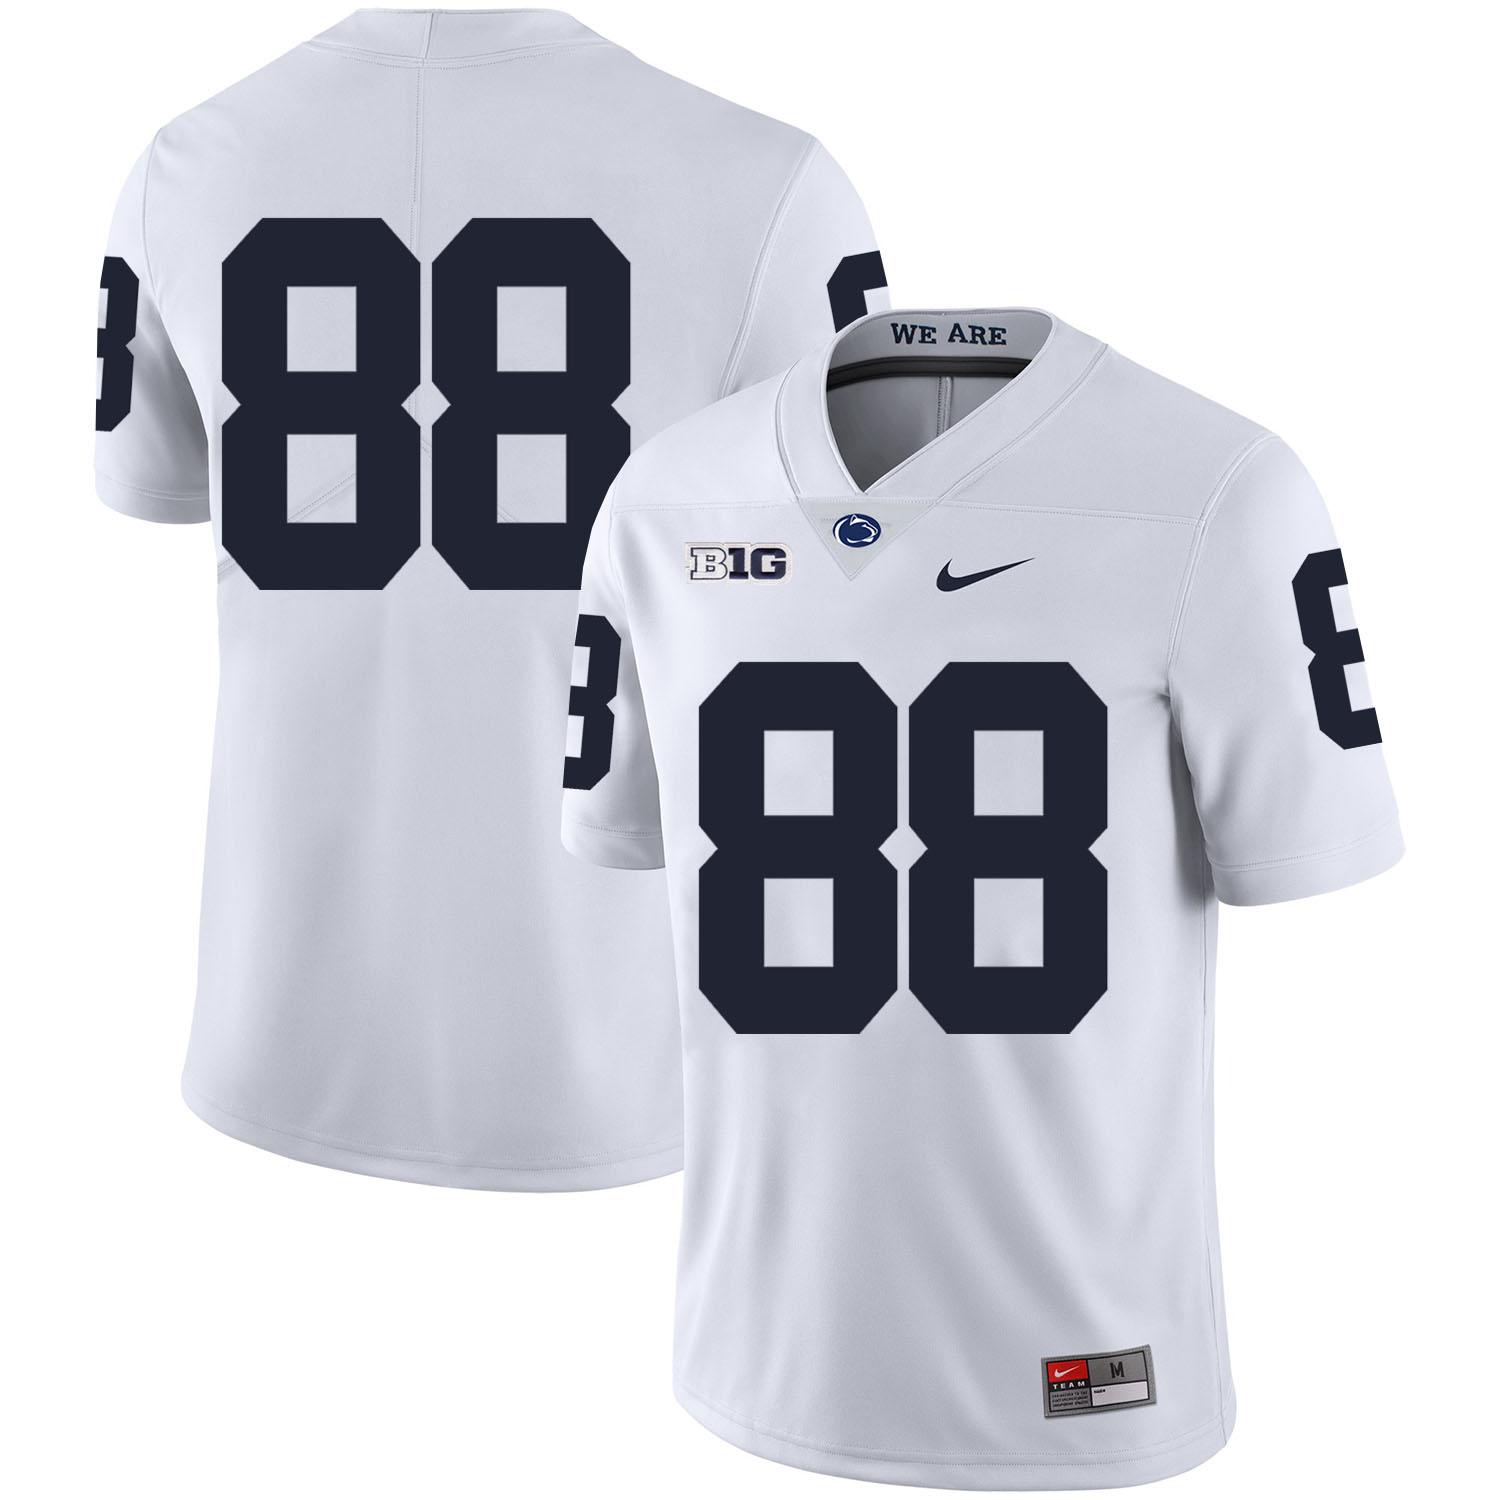 Penn State Nittany Lions 88 Mike Gesicki White Nike College Football Jersey